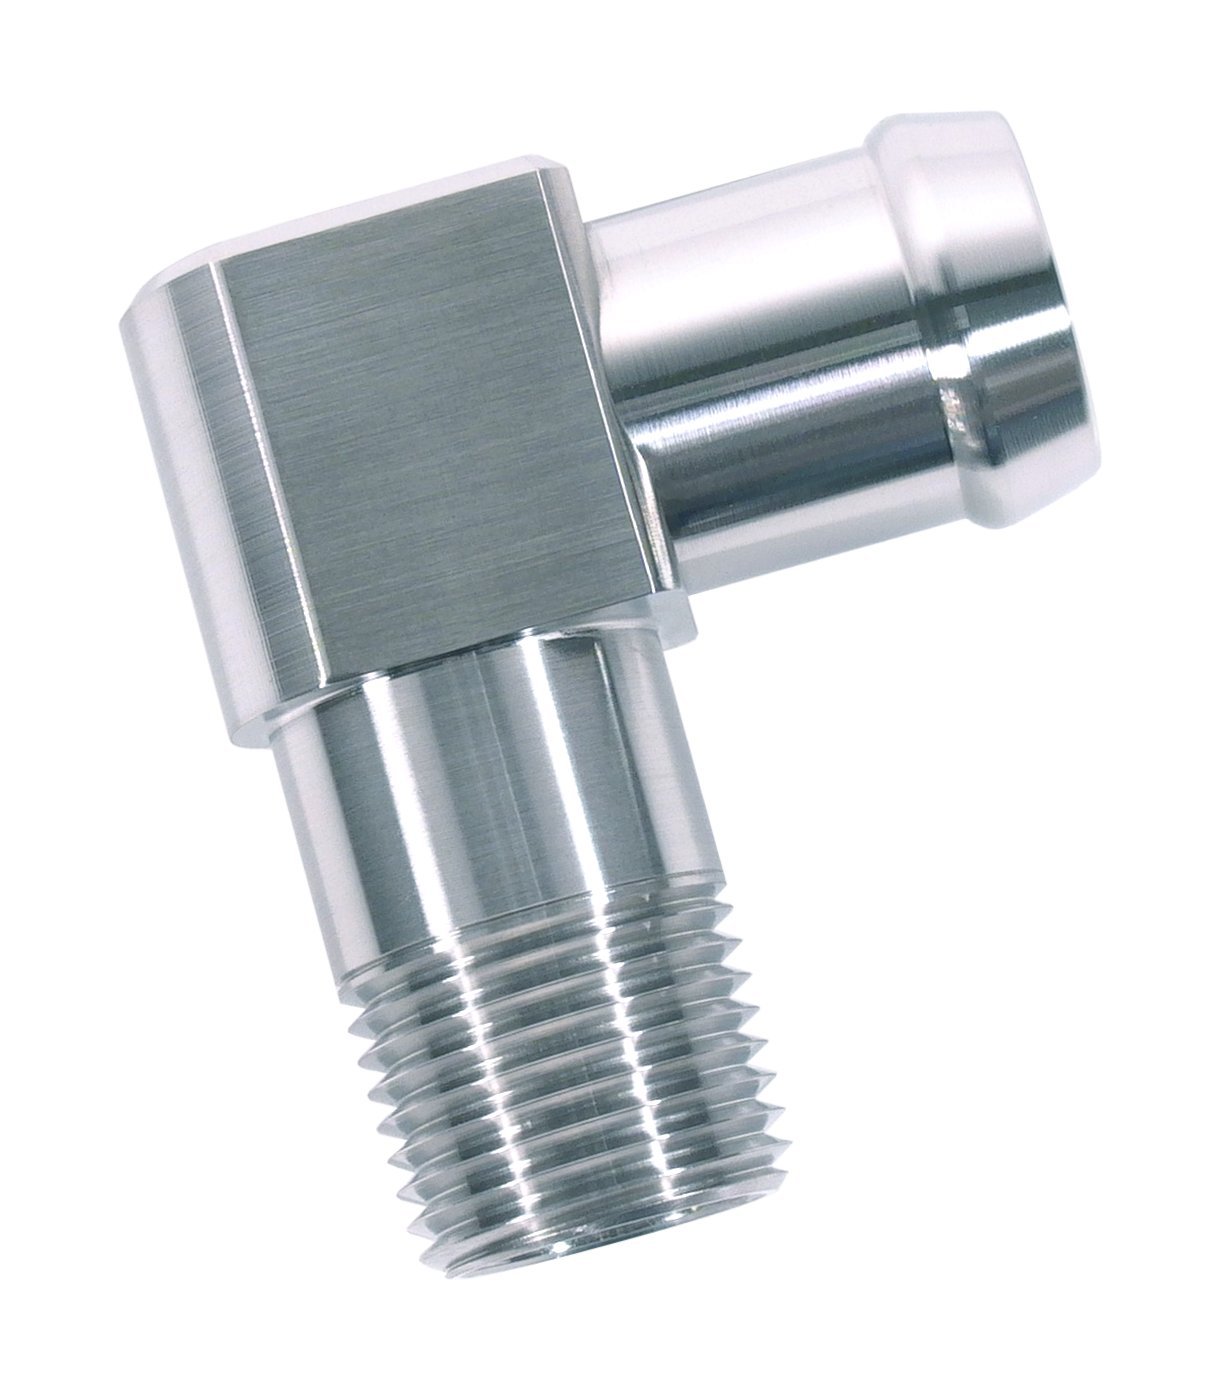 Heater Hose Fitting, 90-Degree, 1/2 in. NPT x 3/4 in. Hose Barb, 2 1/8 in. Length [Natural Finish]